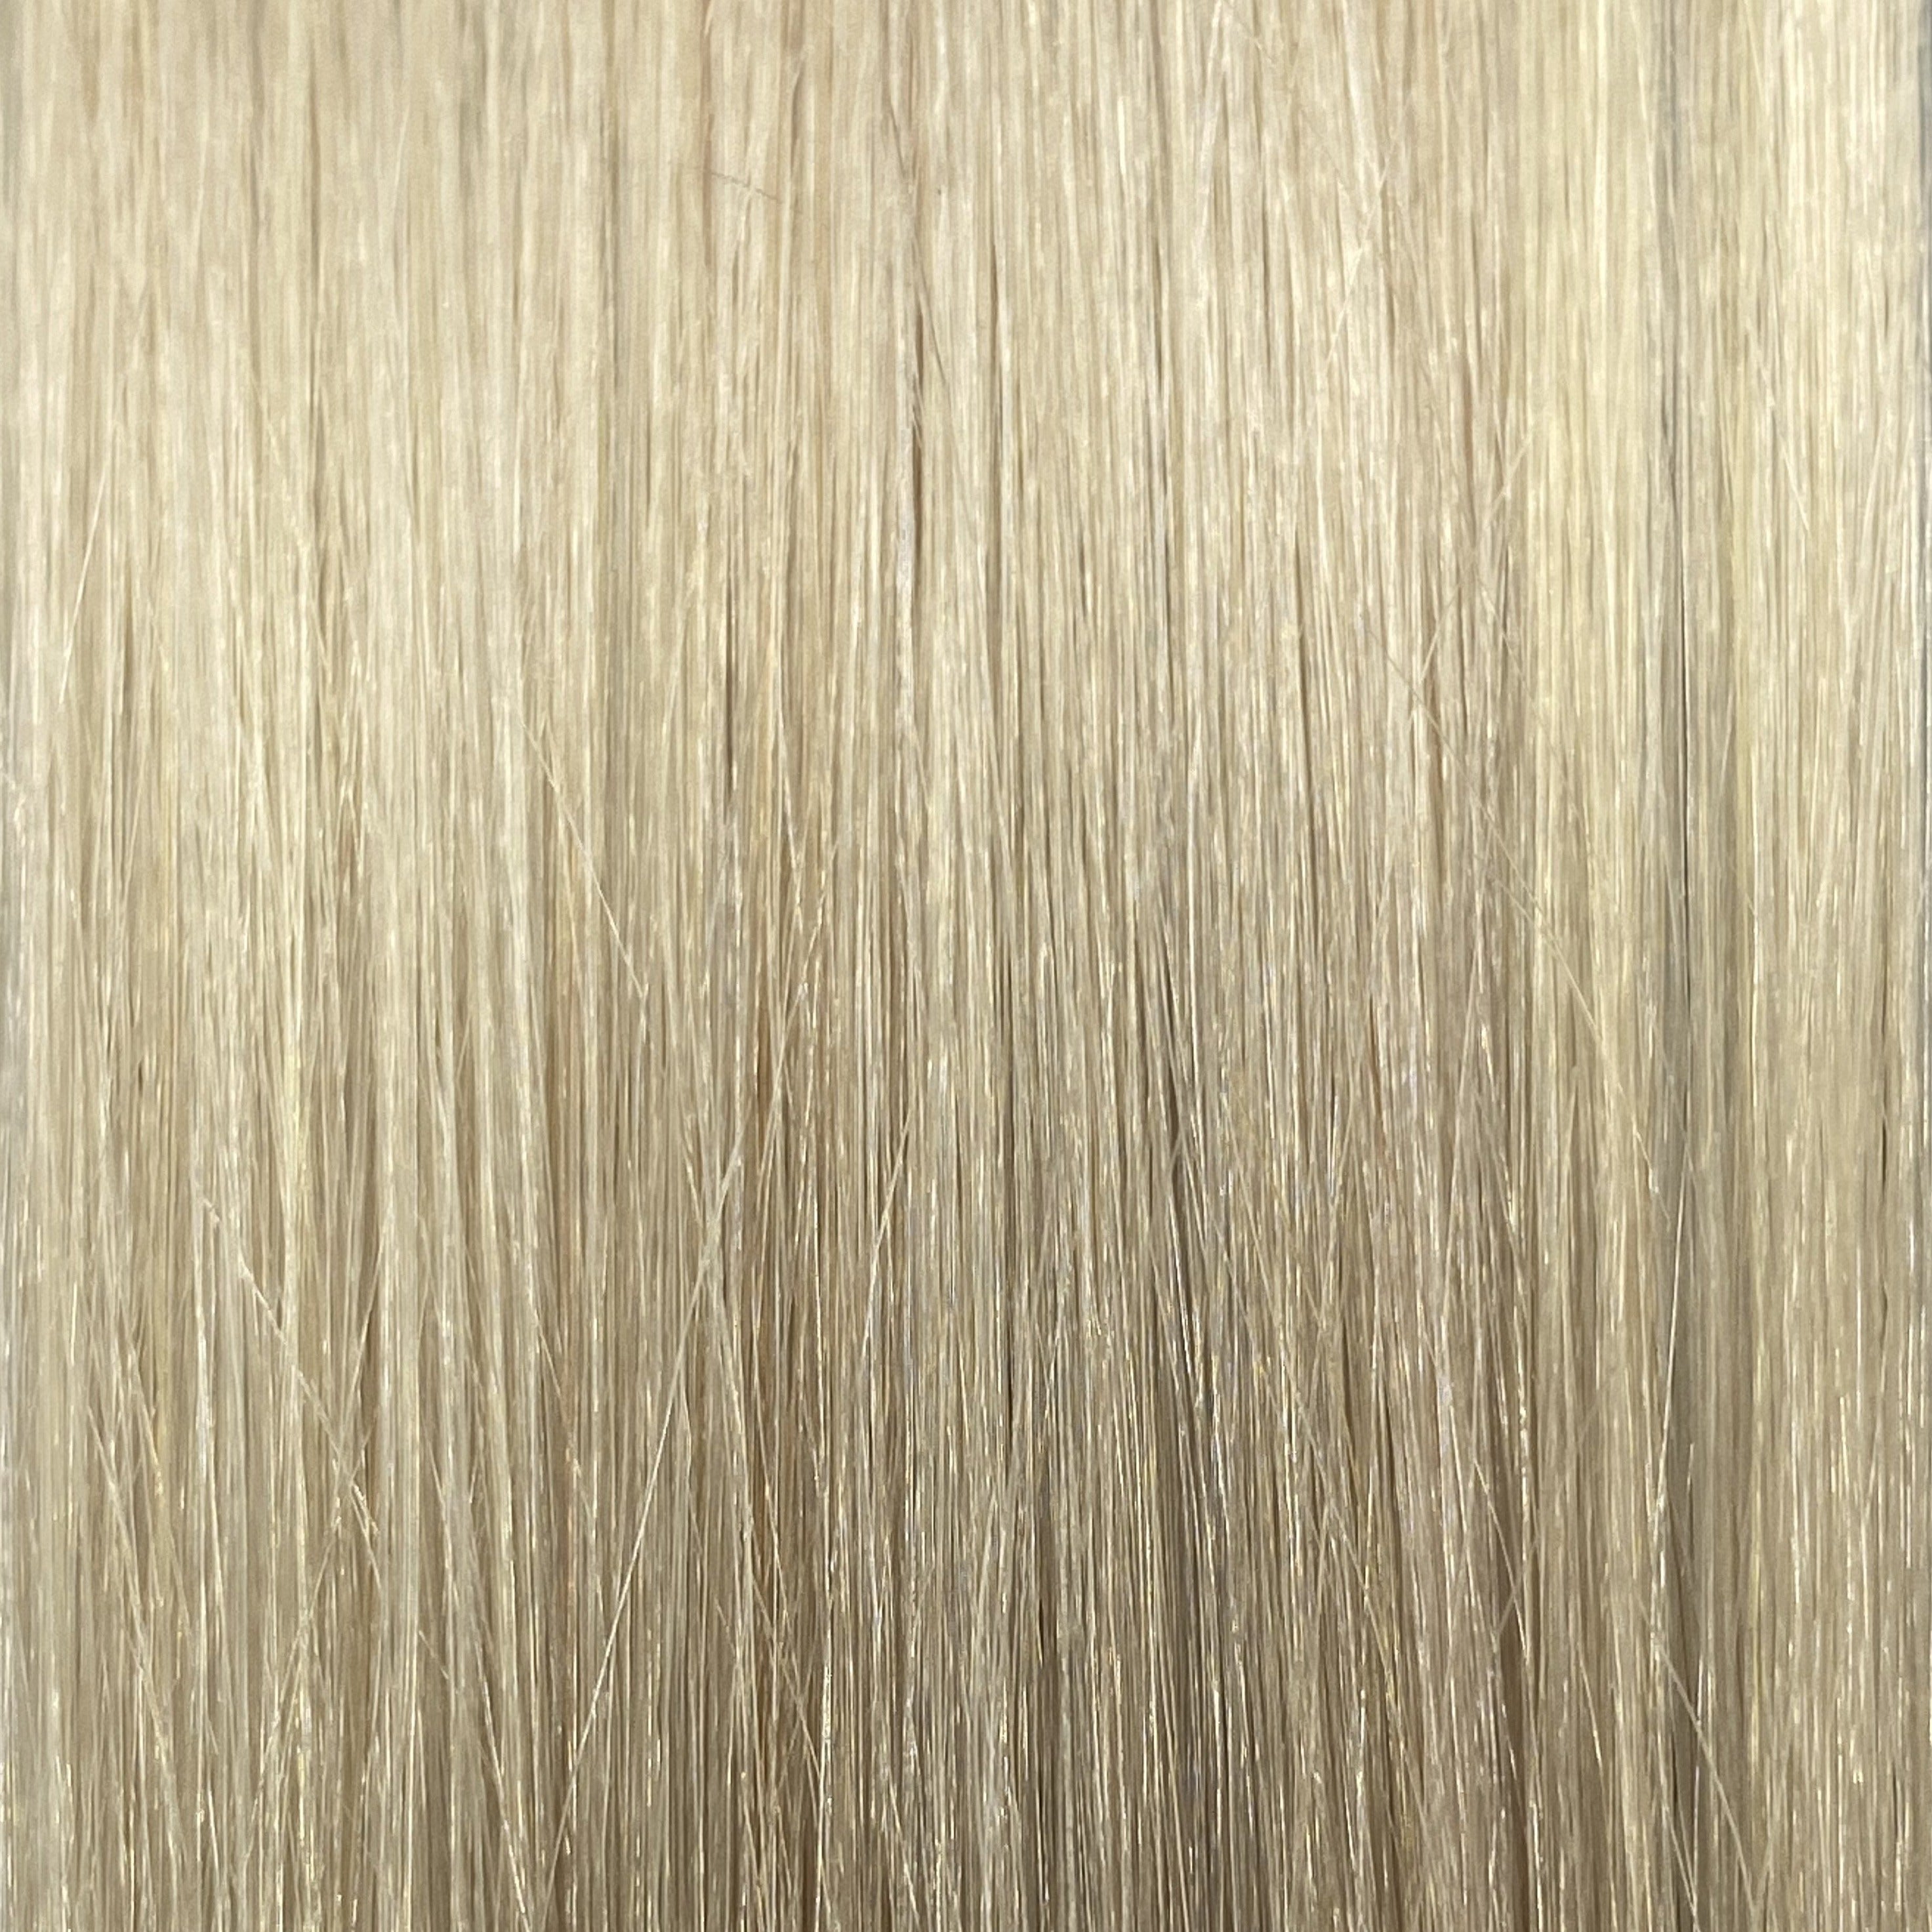 FUSION #1004 ULTRA VERY LIGHT PLATINUM BLONDE 40CM/ 16 INCHES  - 17.5 GRAMS - Image 1